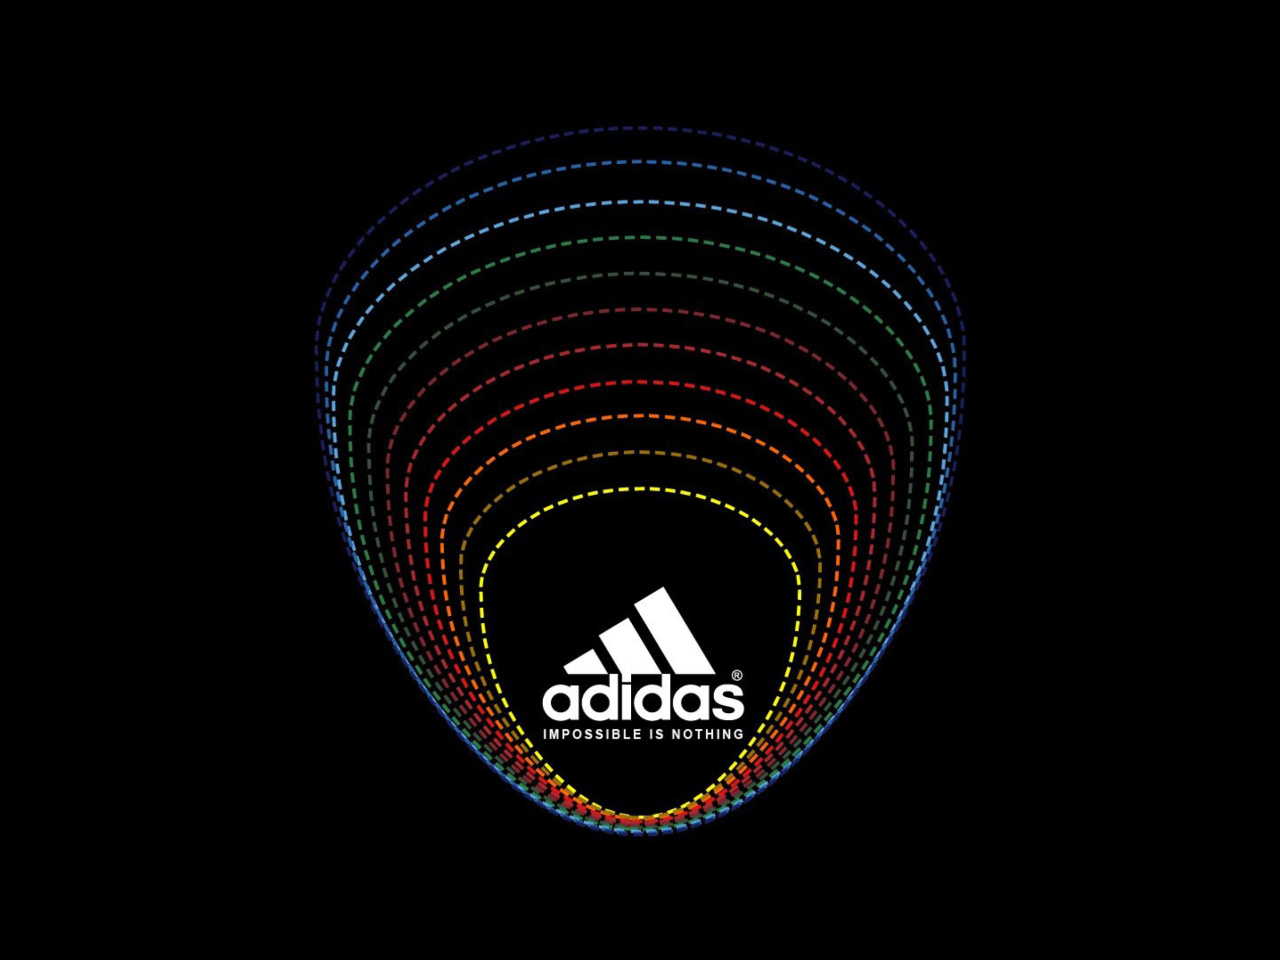 Adidas Tagline, Impossible is Nothing wallpaper 1280x960